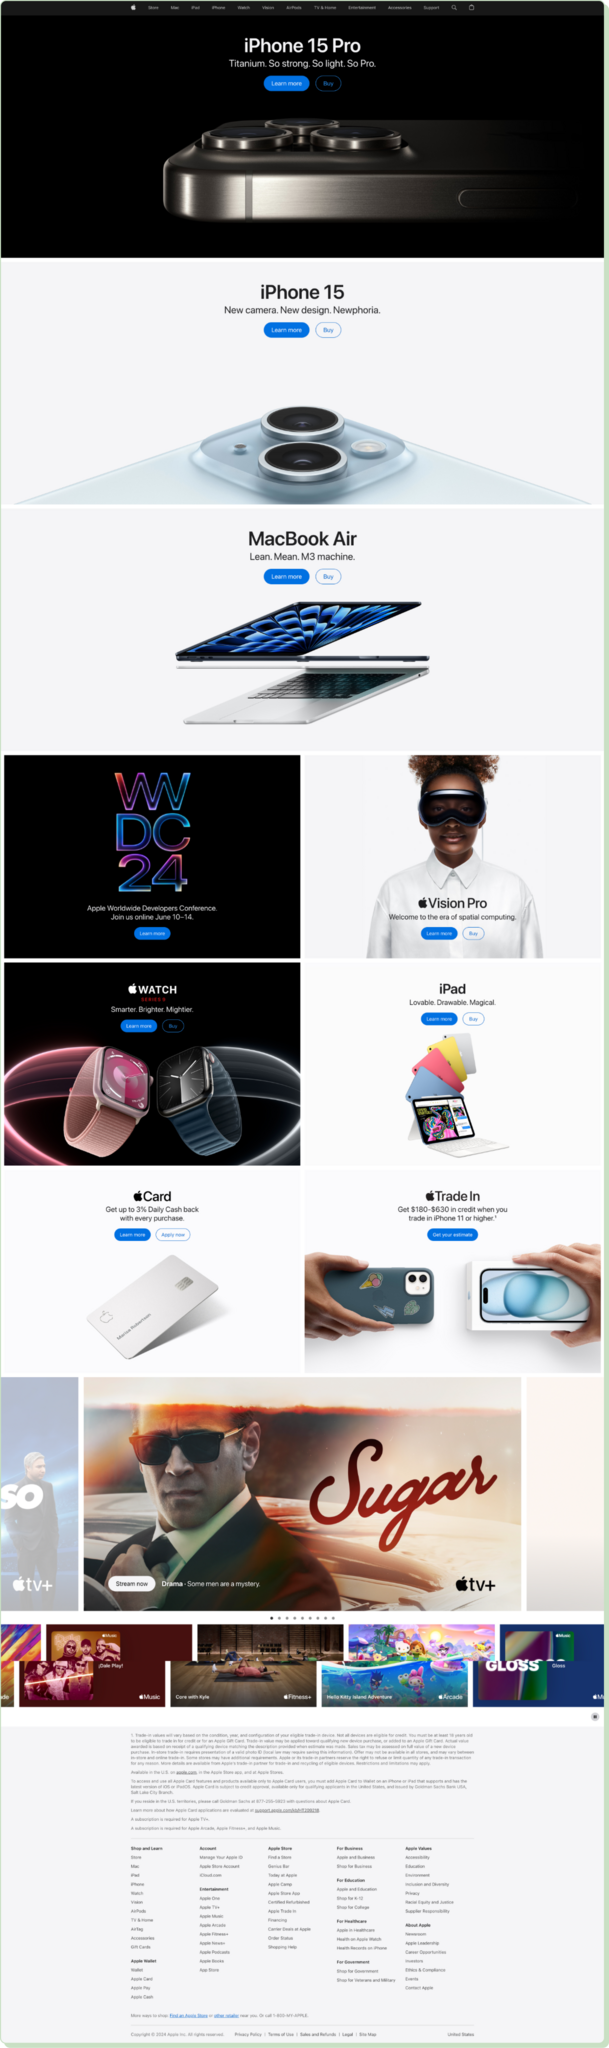 Apple product landing page